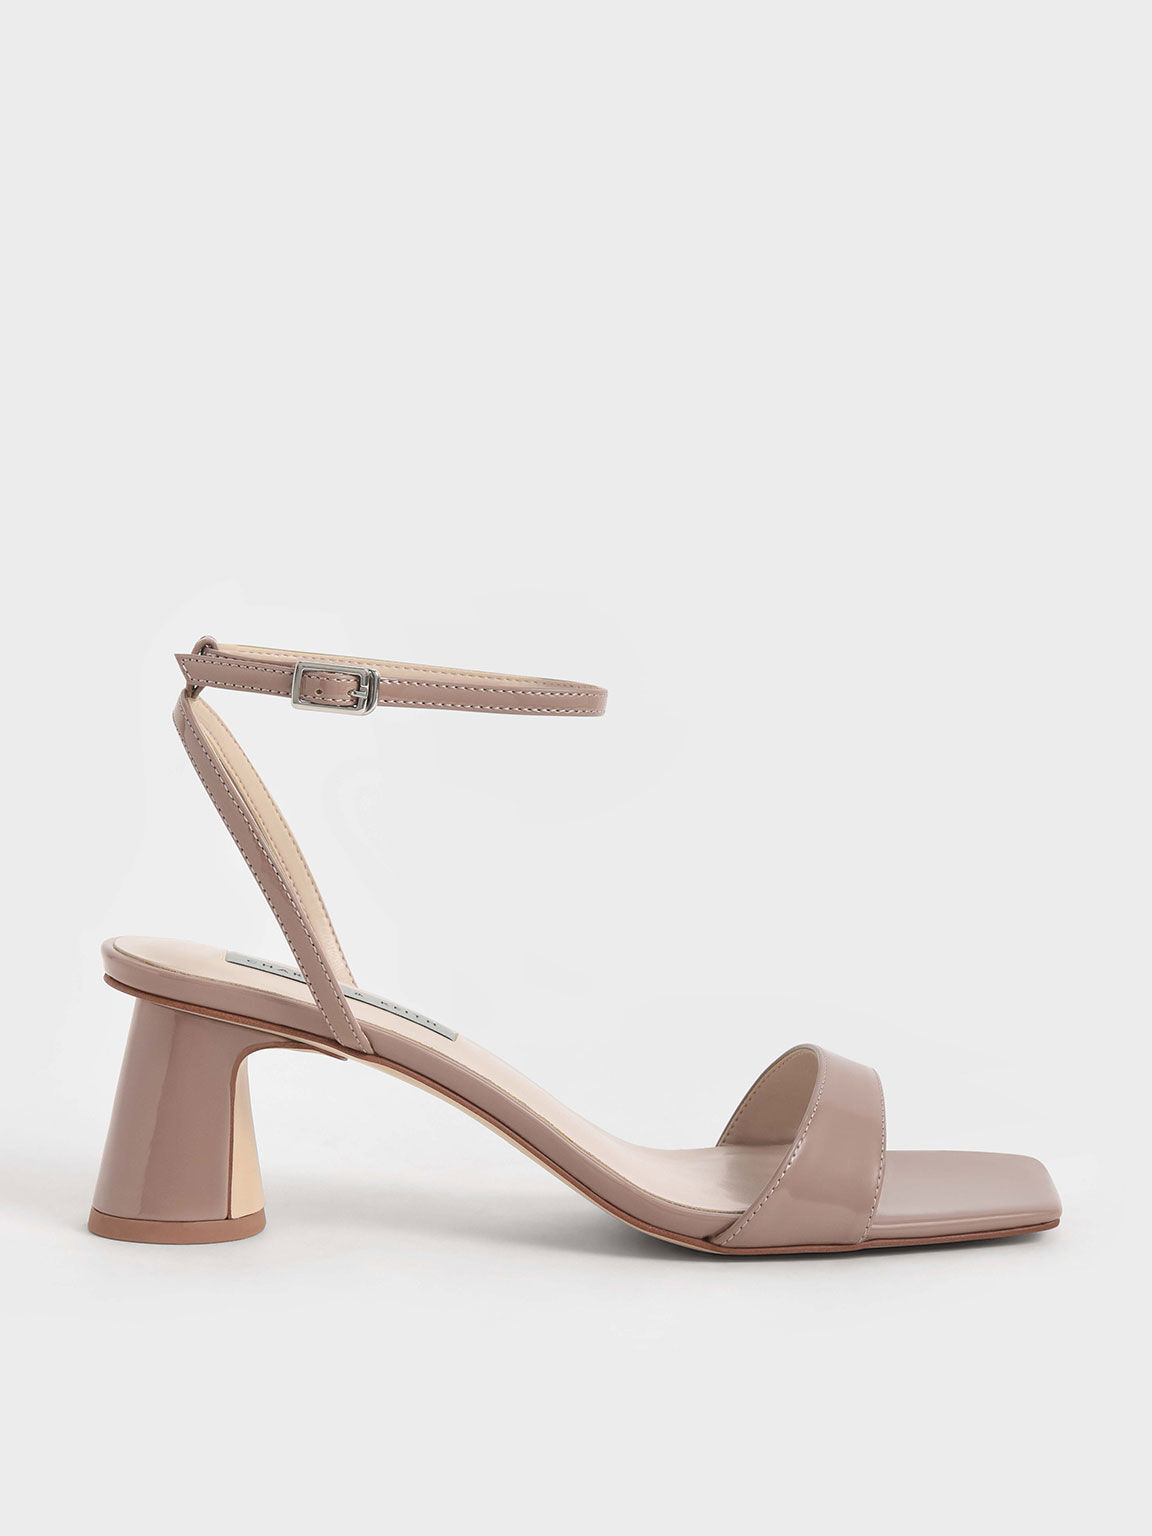 Sandal Cylindrical Heel Patent Ankle-Strap, Nude, hi-res